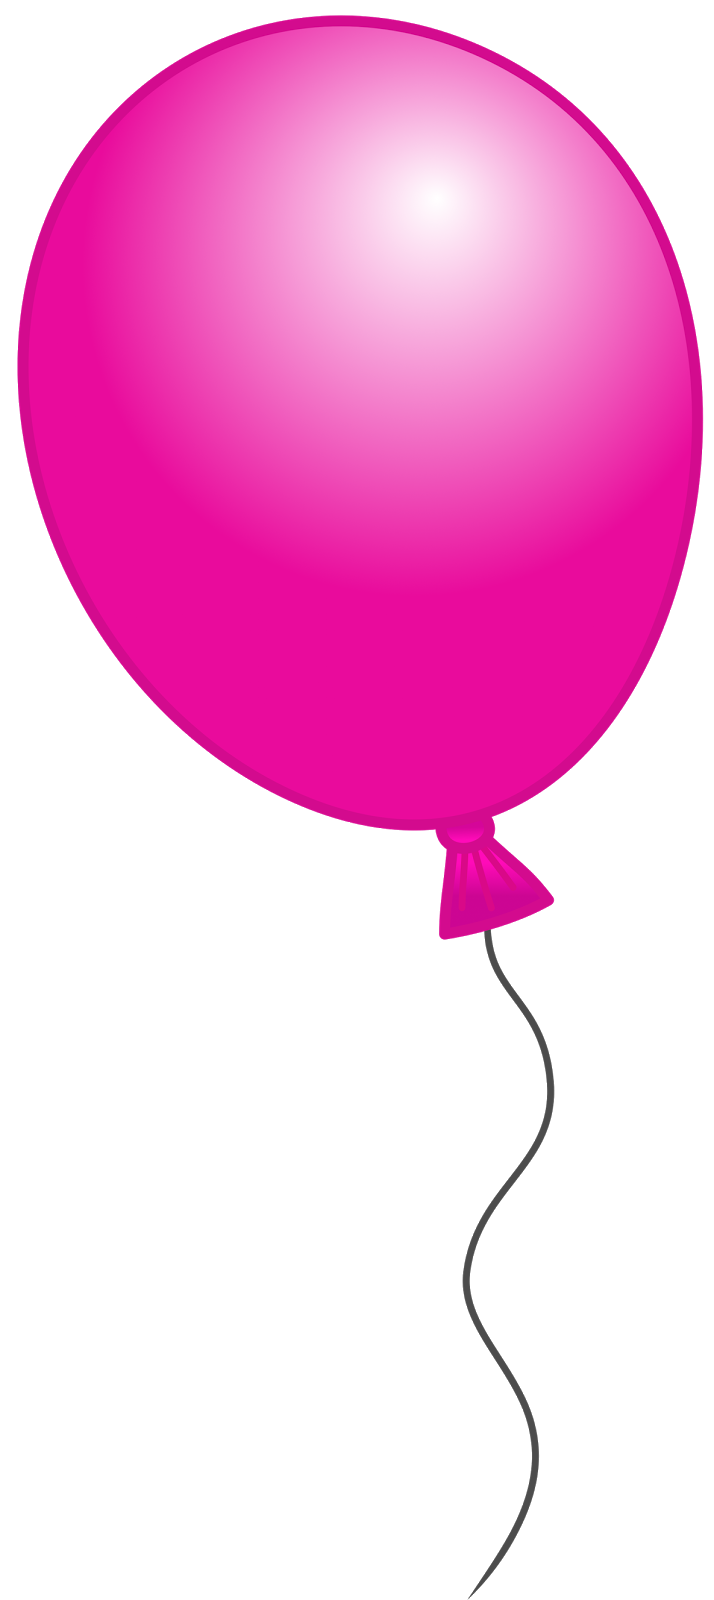 Pink Birthday Balloons Clipart No Background Clipart Best Clipart Best